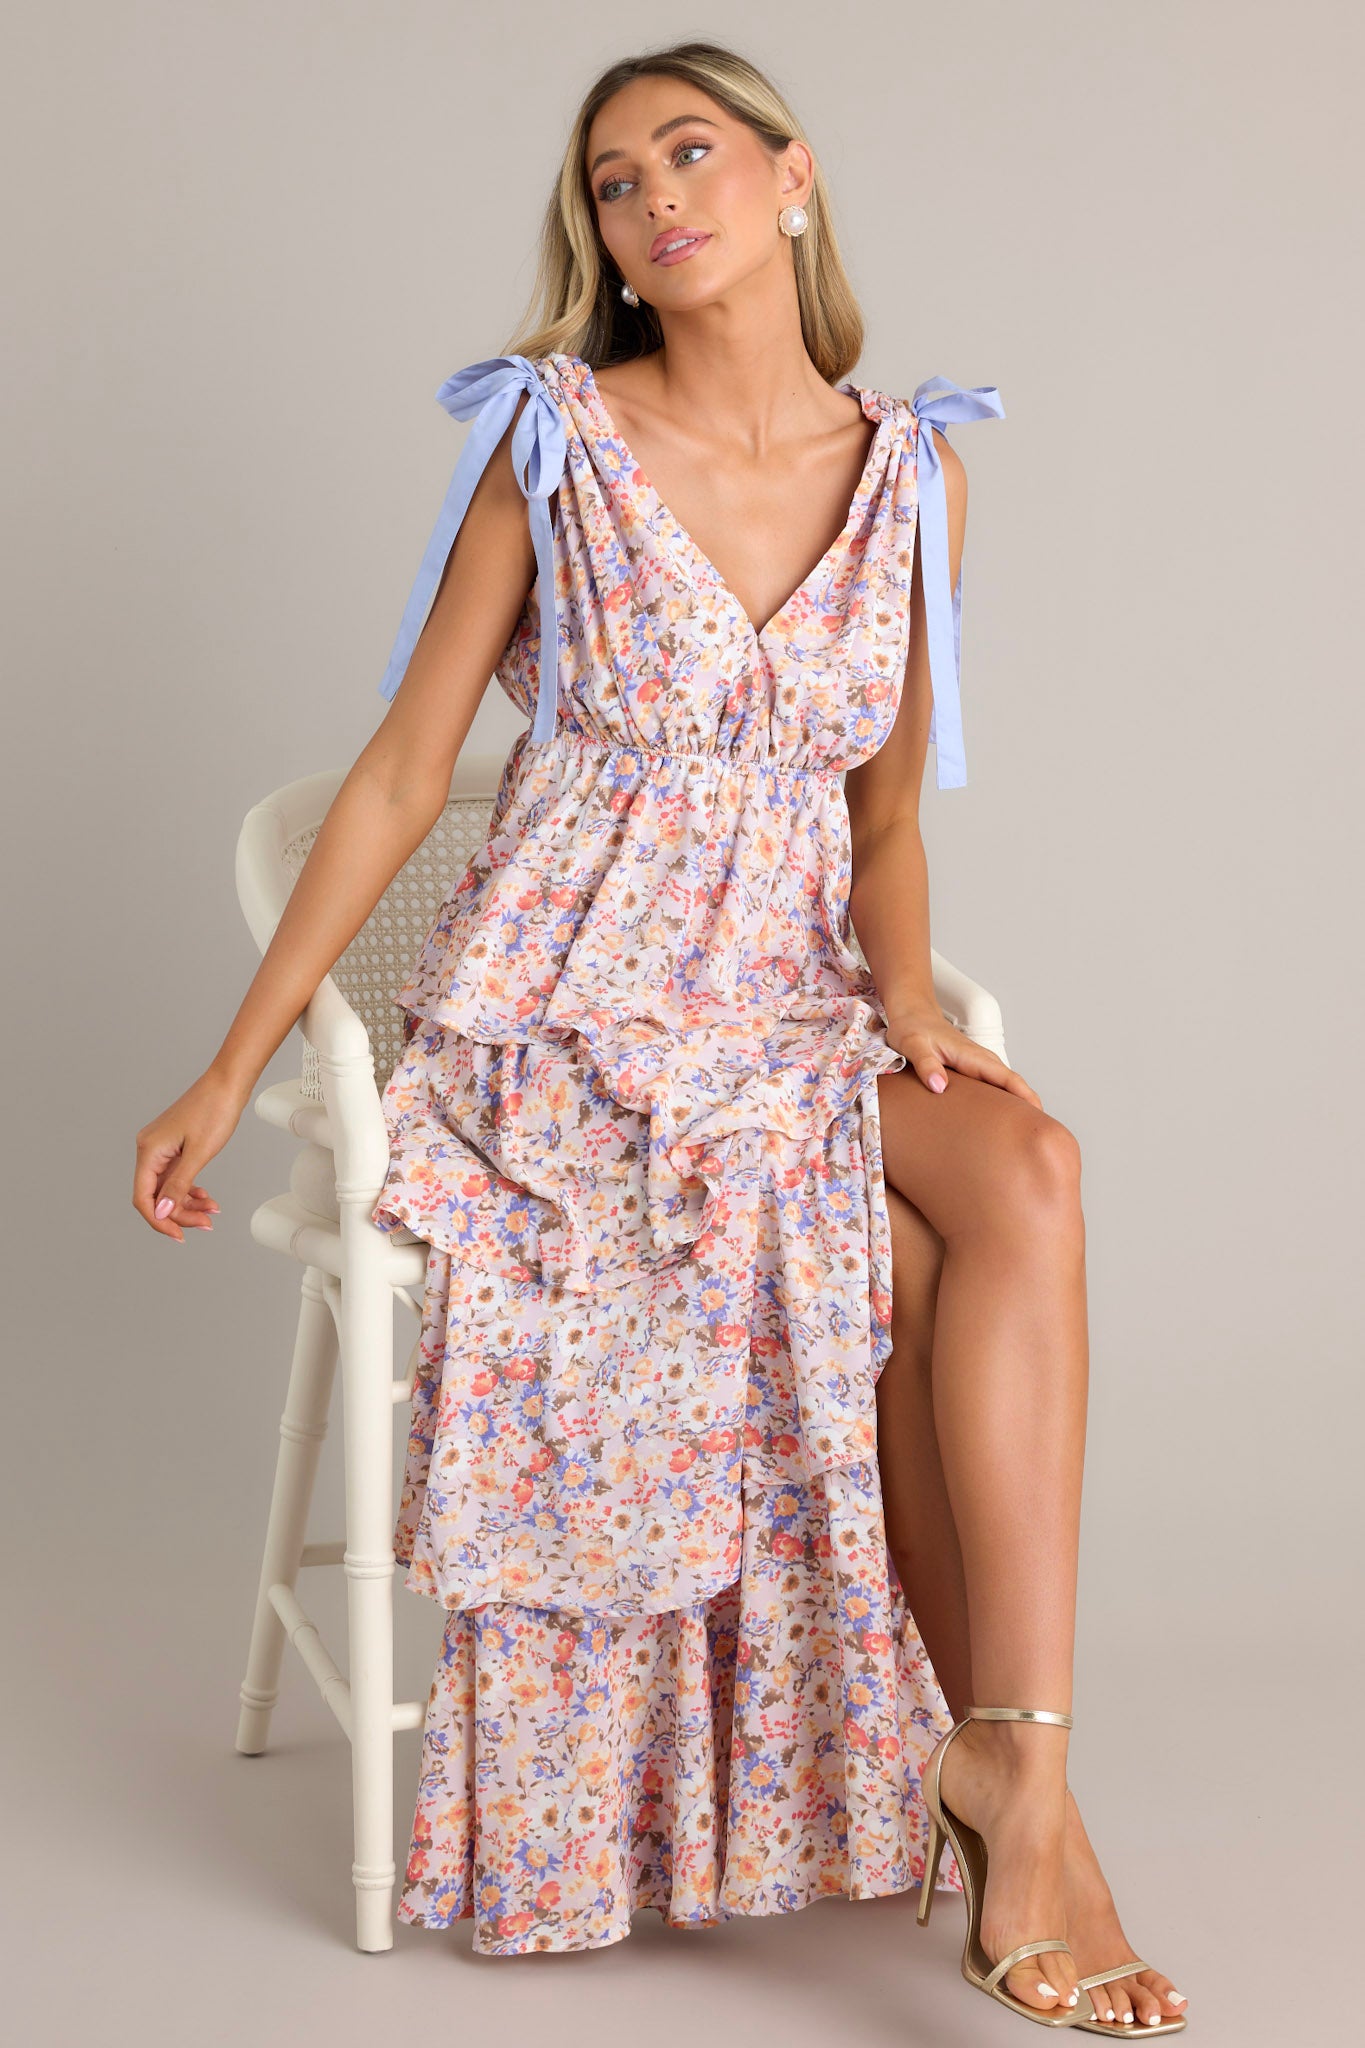 Seated view of this lavender floral dress featuring an empire waist, a V neckline, self ties at the top of the thick sleeveless gathered straps, an elastic waist, a slit up the front, and tier layers down the skirt.